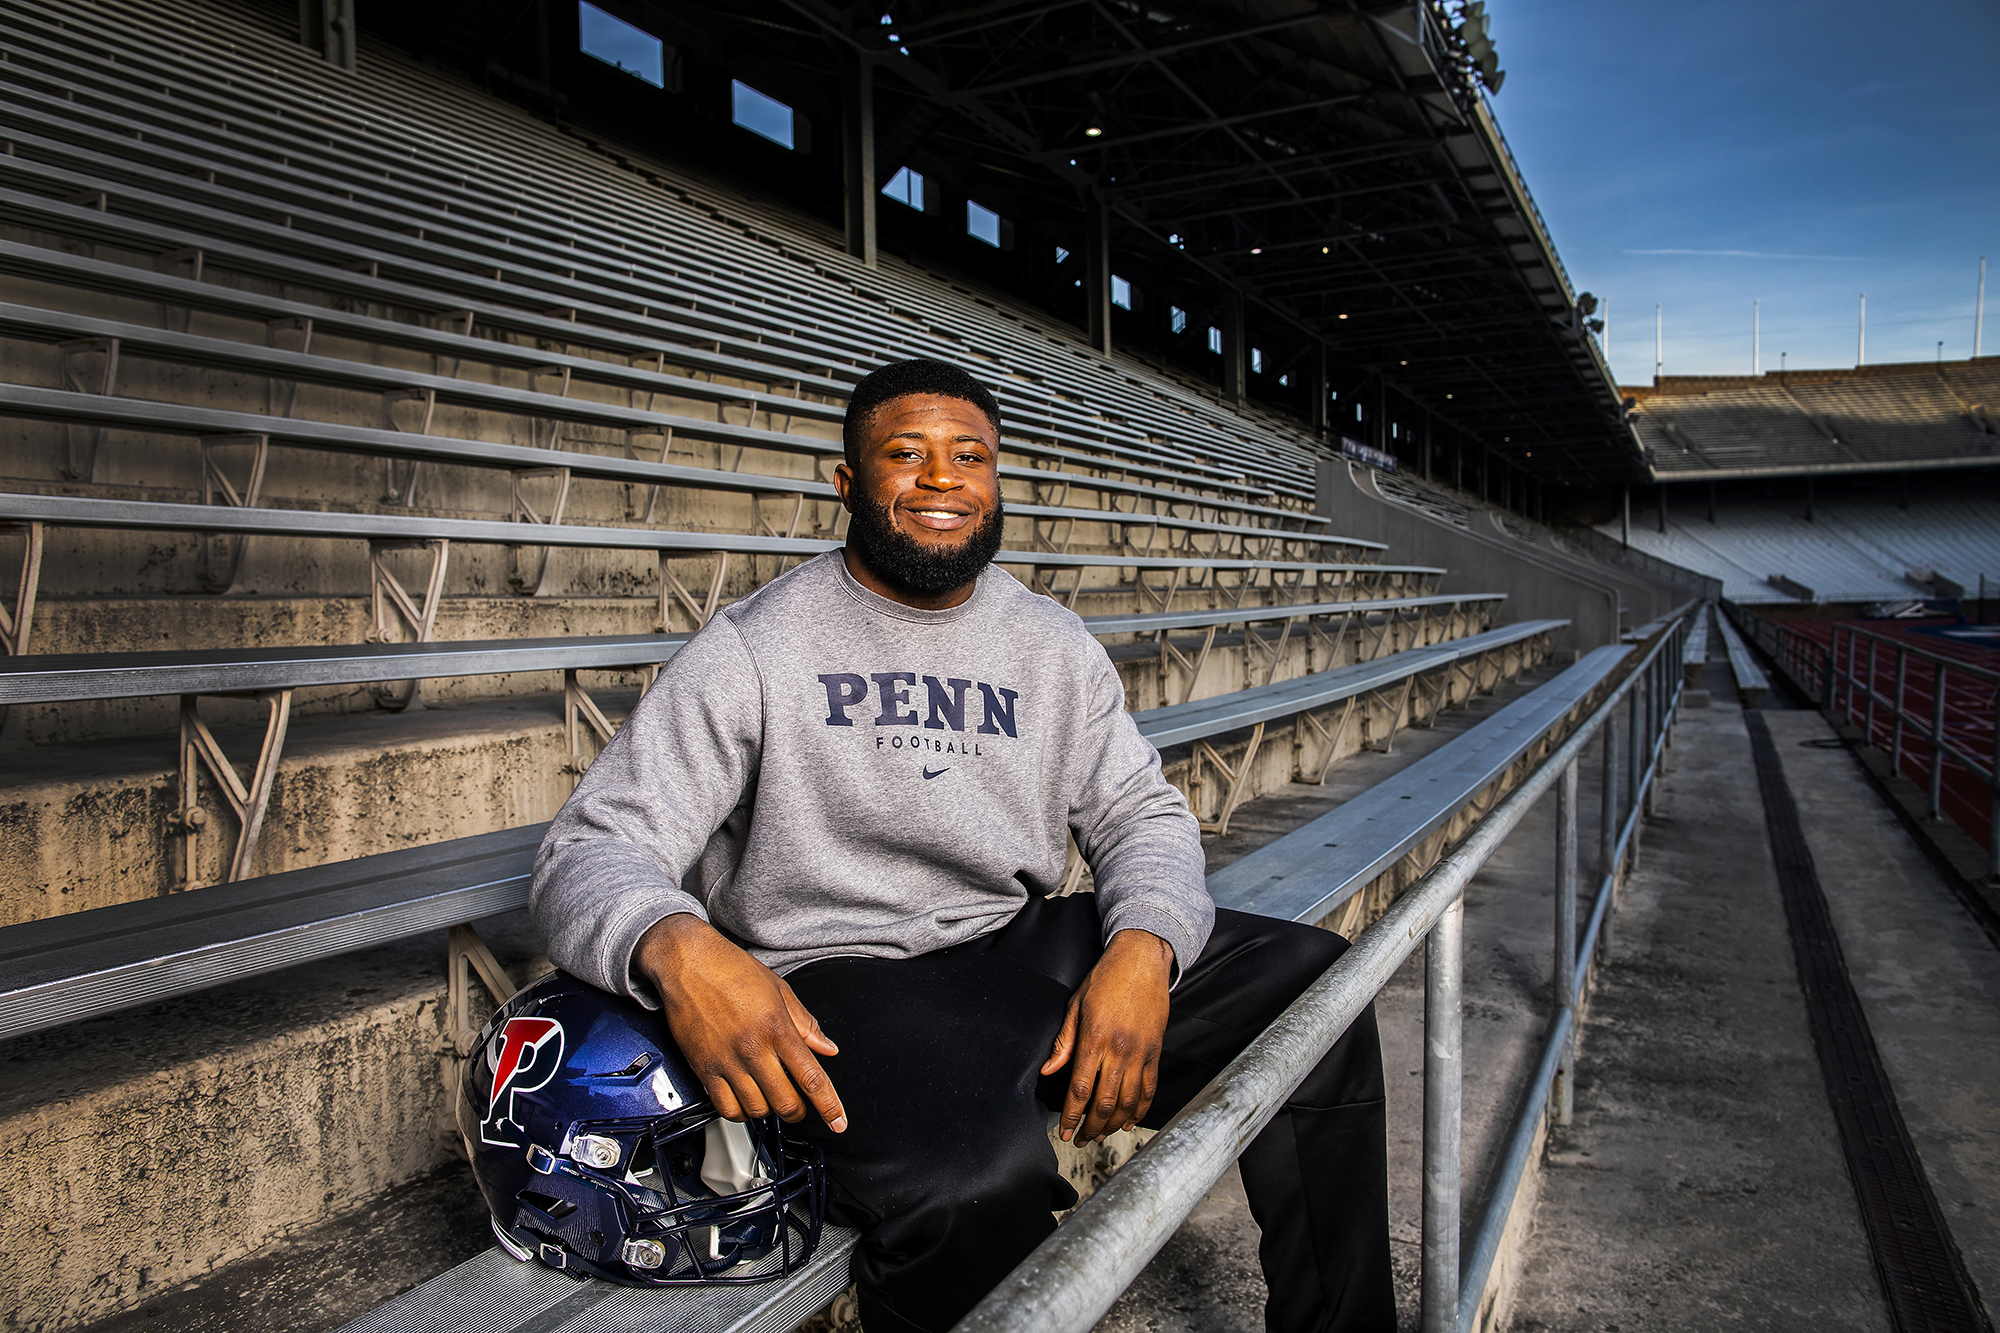 Prince Emili of the football team sits in the Franklin Field bleachers with his arm rested on his Penn helmet.